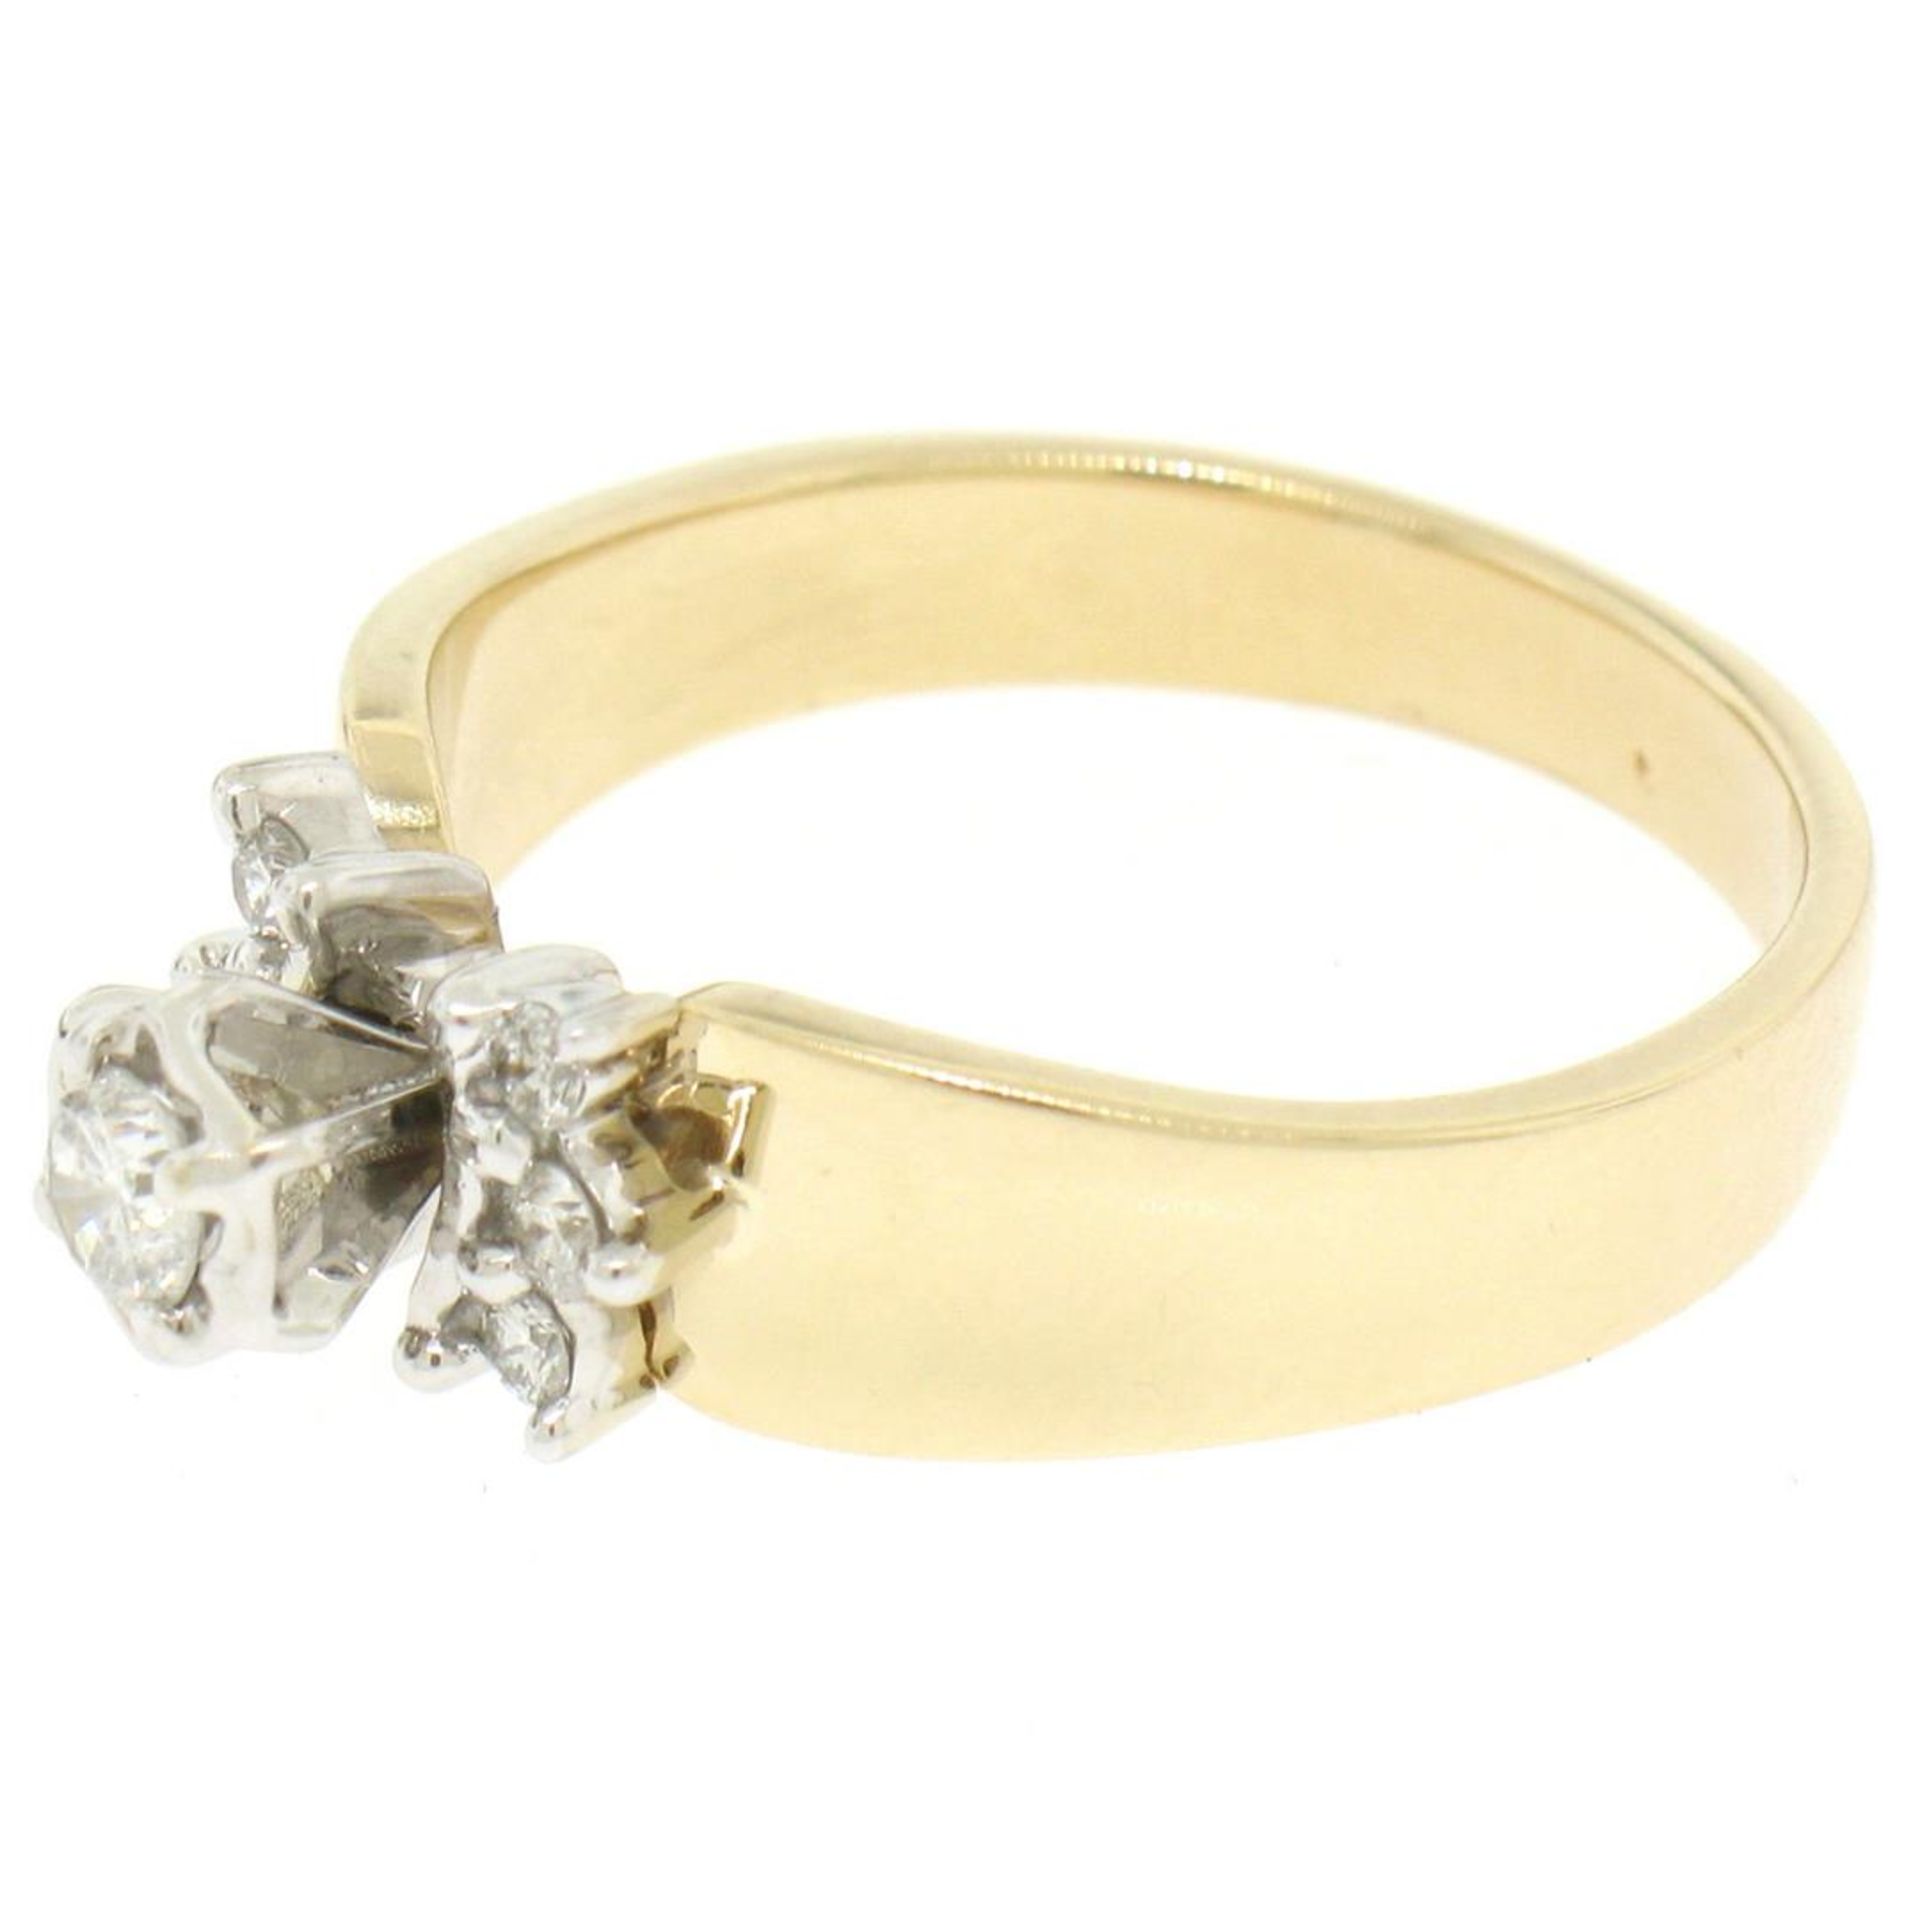 14k Two Tone Gold 0.30 ctw Illusion Set Solitaire Diamond Engagement Ring - Image 6 of 8